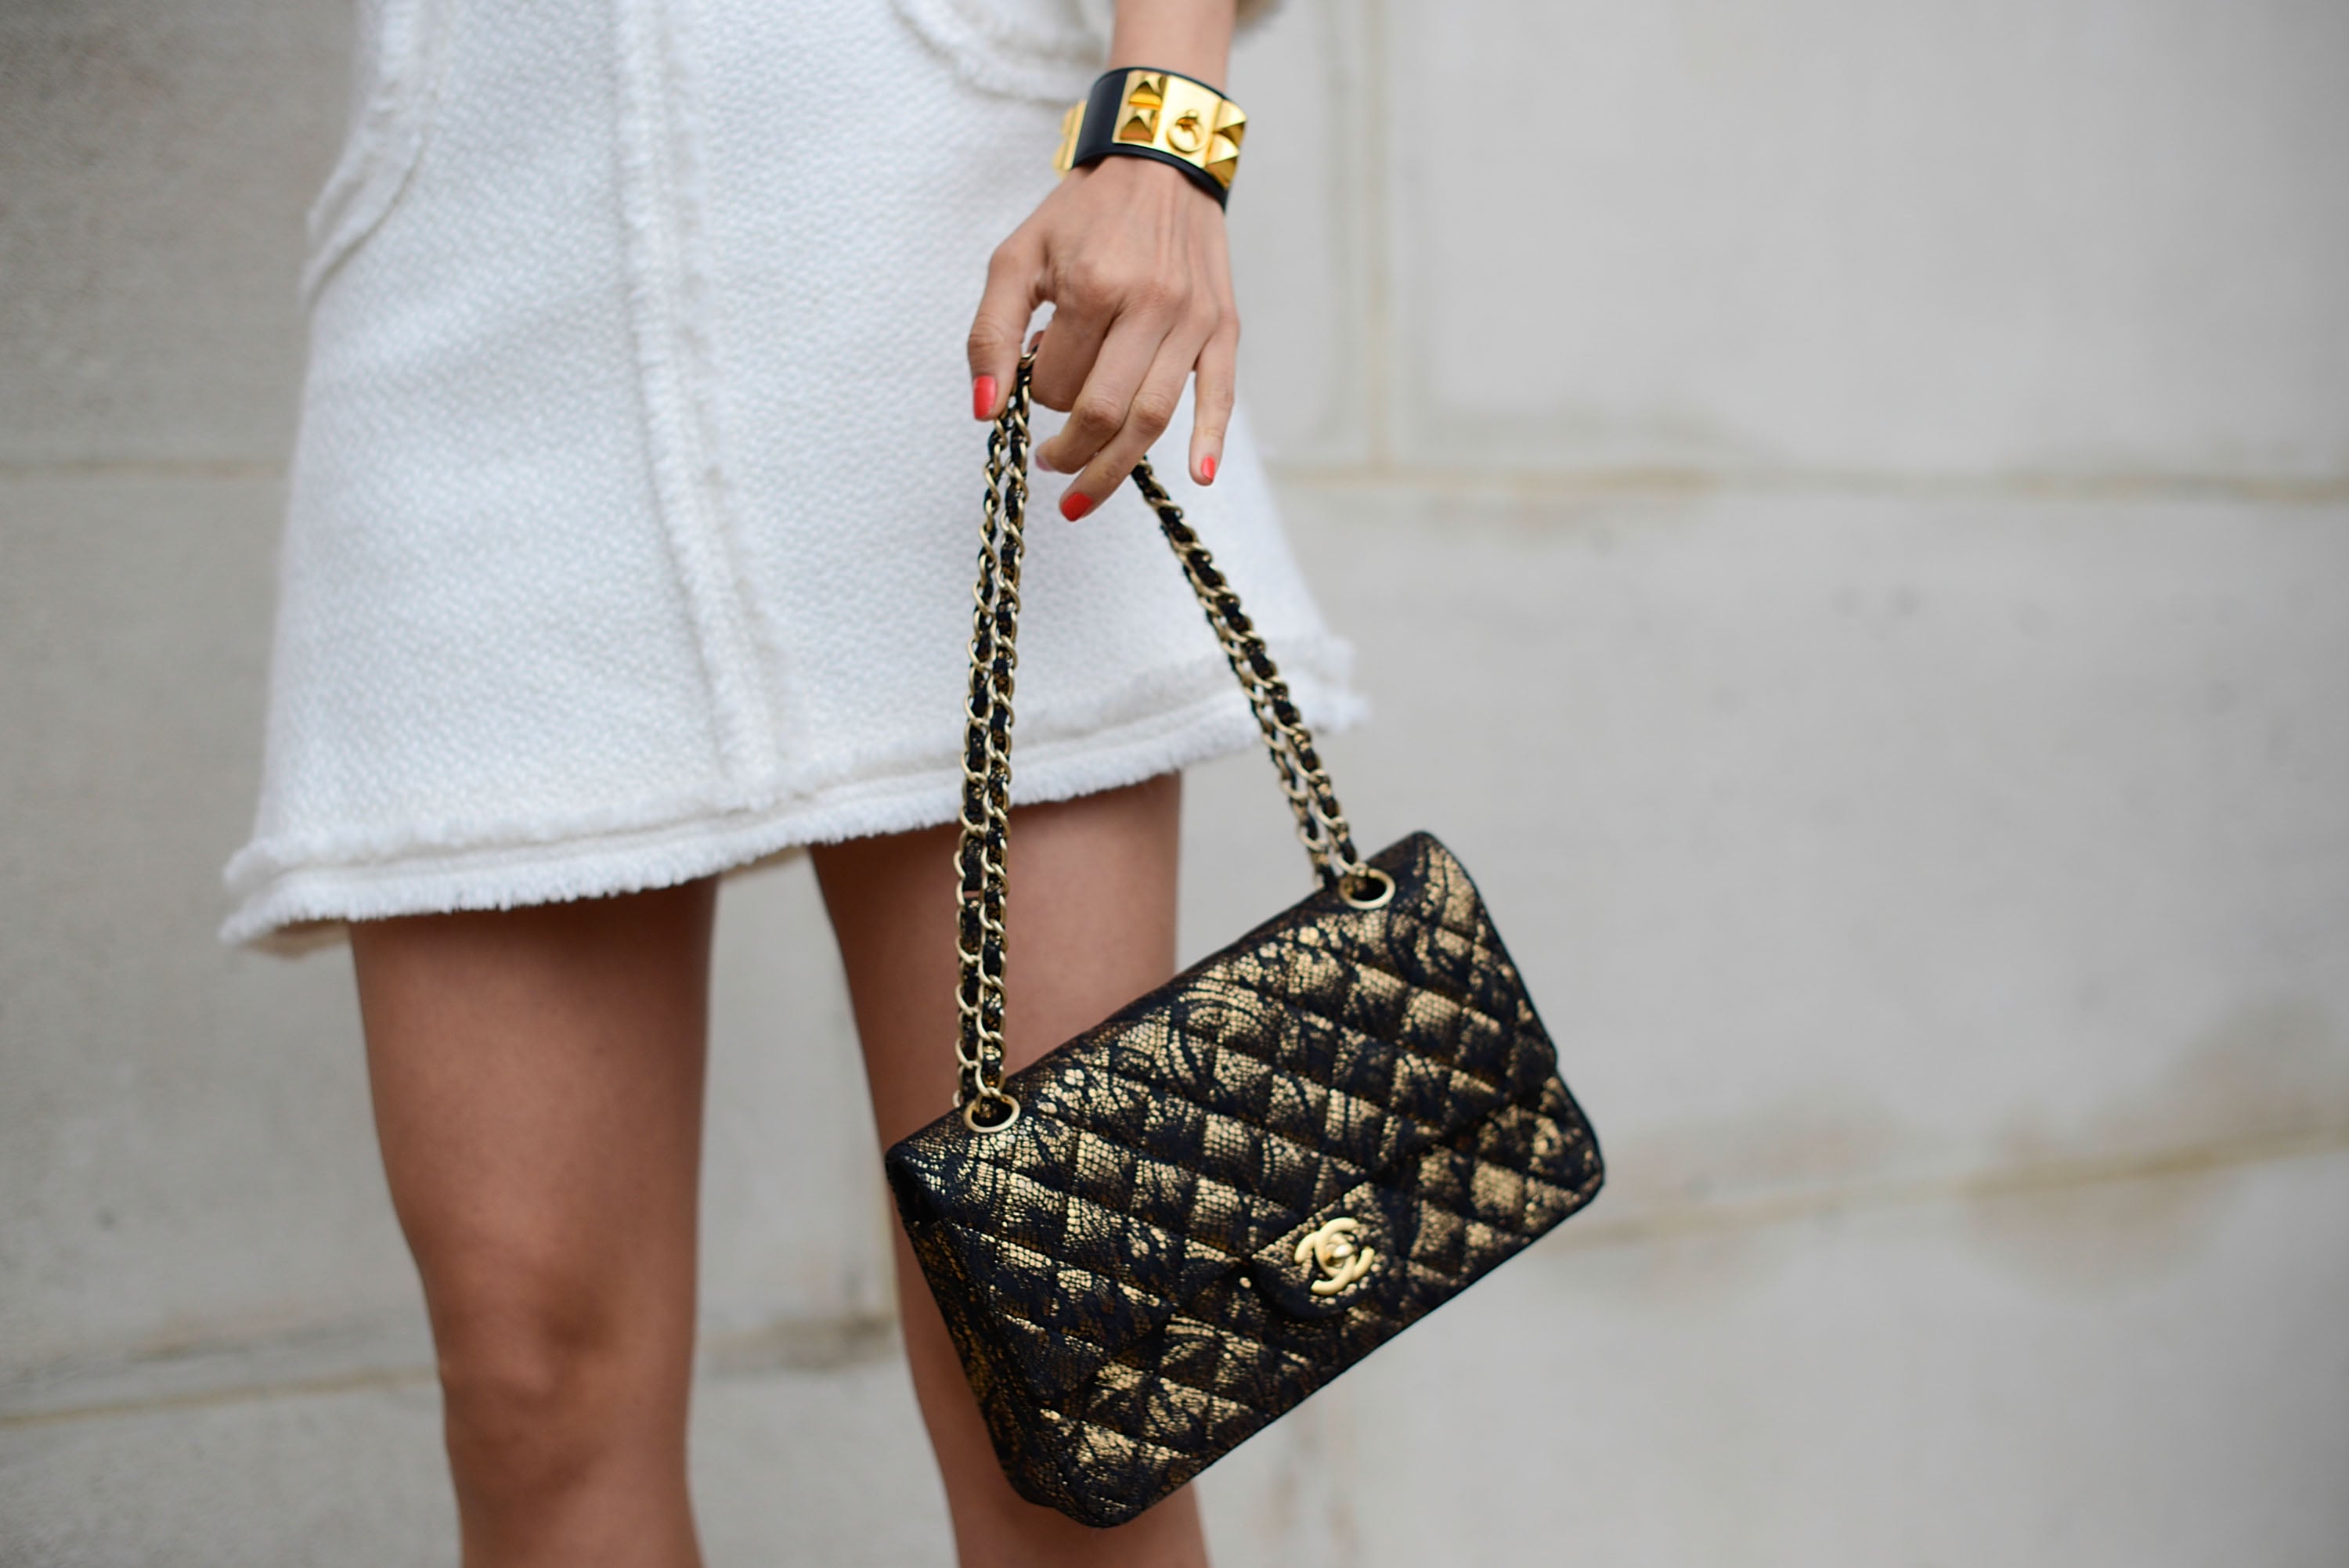 The 10 Iconic Bags Fashion Girls Would Kill to Own